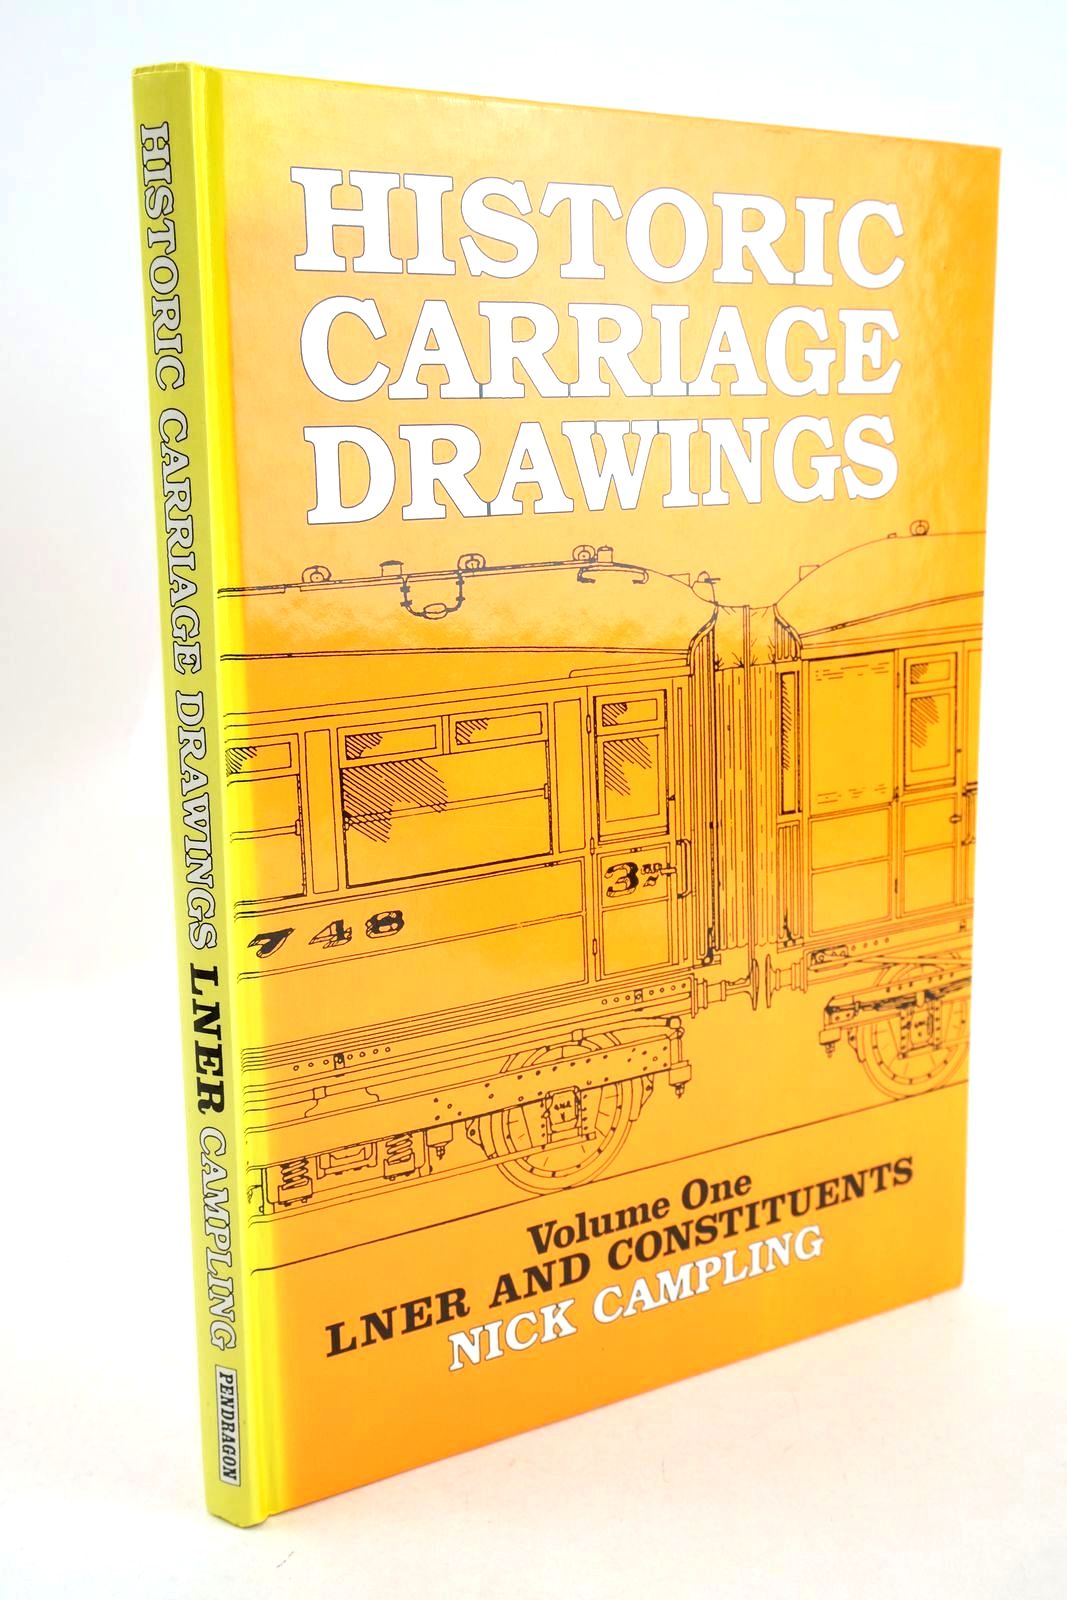 Photo of HISTORIC CARRIAGE DRAWINGS VOLUME ONE: LNER AND CONSTITUENTS written by Campling, Nick published by Pendragon Partnership (STOCK CODE: 1327107)  for sale by Stella & Rose's Books